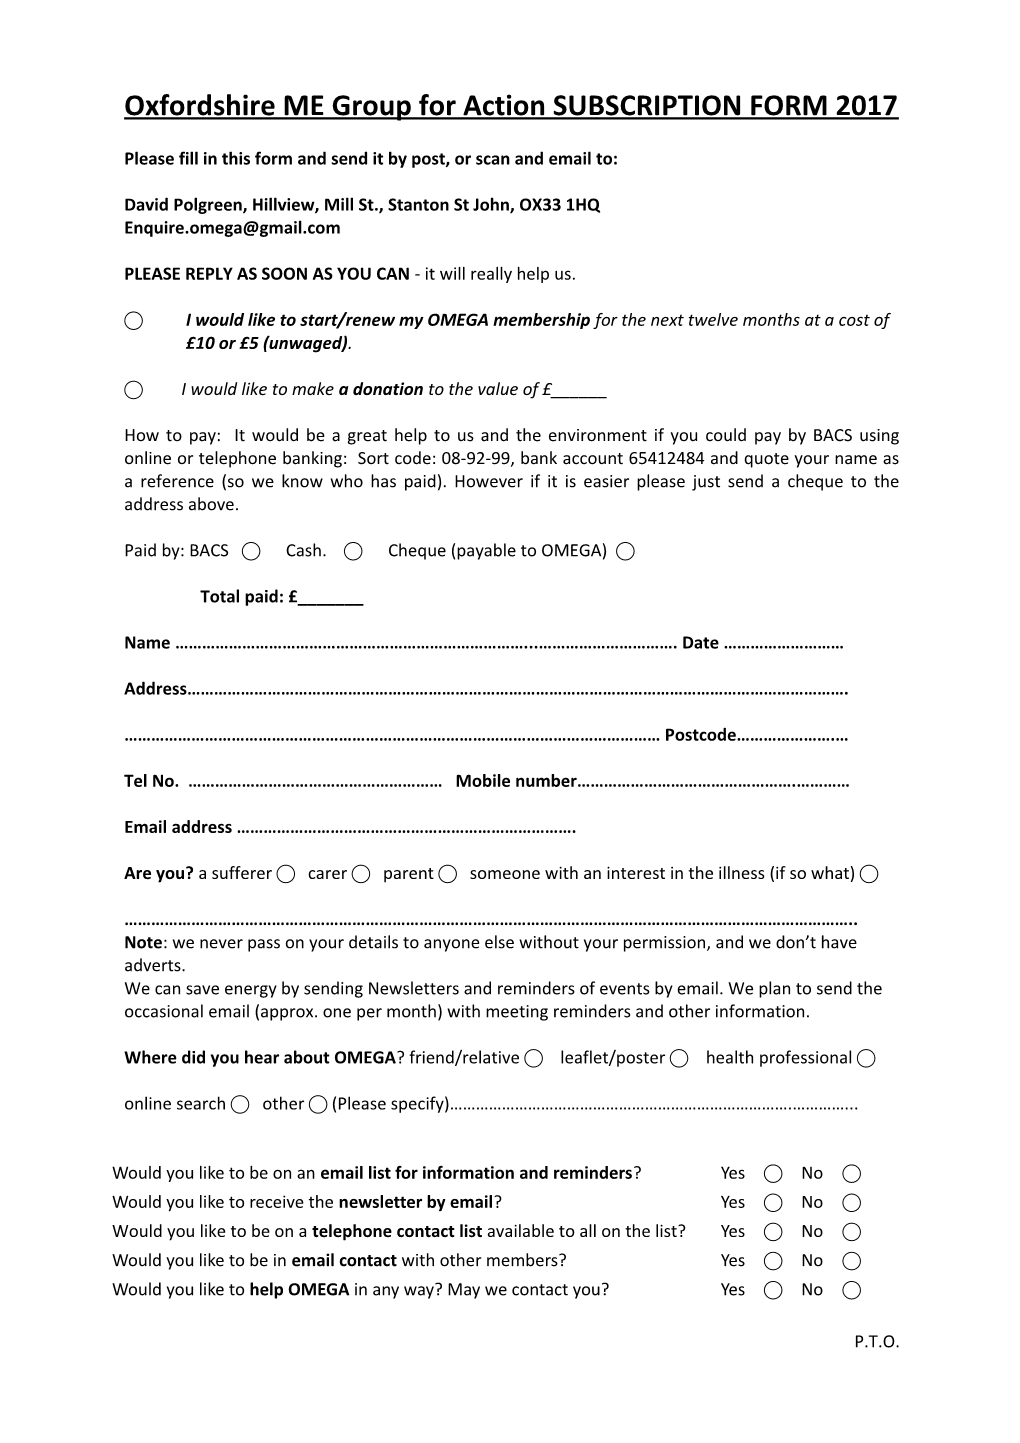 (Oxfordshire ME Group for Action) SUBSCRIPTION FORM 2016